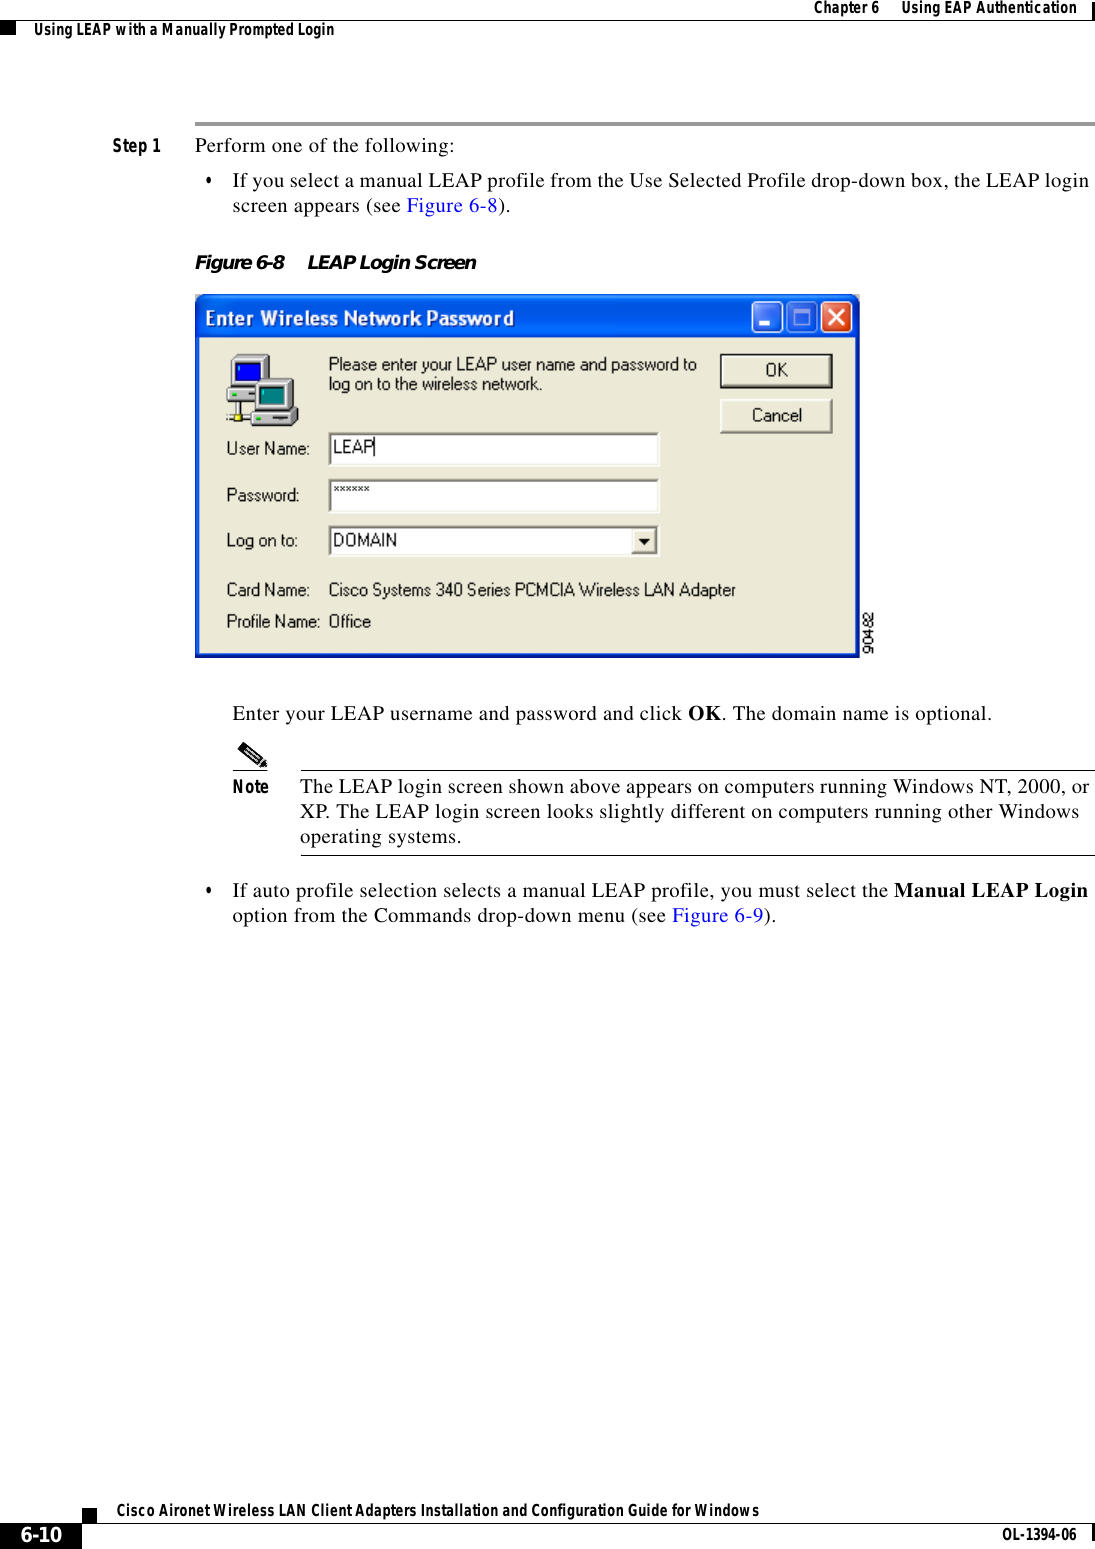 6-10Cisco Aironet Wireless LAN Client Adapters Installation and Configuration Guide for Windows OL-1394-06Chapter 6      Using EAP AuthenticationUsing LEAP with a Manually Prompted LoginStep 1 Perform one of the following:•If you select a manual LEAP profile from the Use Selected Profile drop-down box, the LEAP login screen appears (see Figure 6-8).Figure 6-8 LEAP Login ScreenEnter your LEAP username and password and click OK. The domain name is optional.Note The LEAP login screen shown above appears on computers running Windows NT, 2000, or XP. The LEAP login screen looks slightly different on computers running other Windows operating systems.•If auto profile selection selects a manual LEAP profile, you must select the Manual LEAP Loginoption from the Commands drop-down menu (see Figure 6-9).